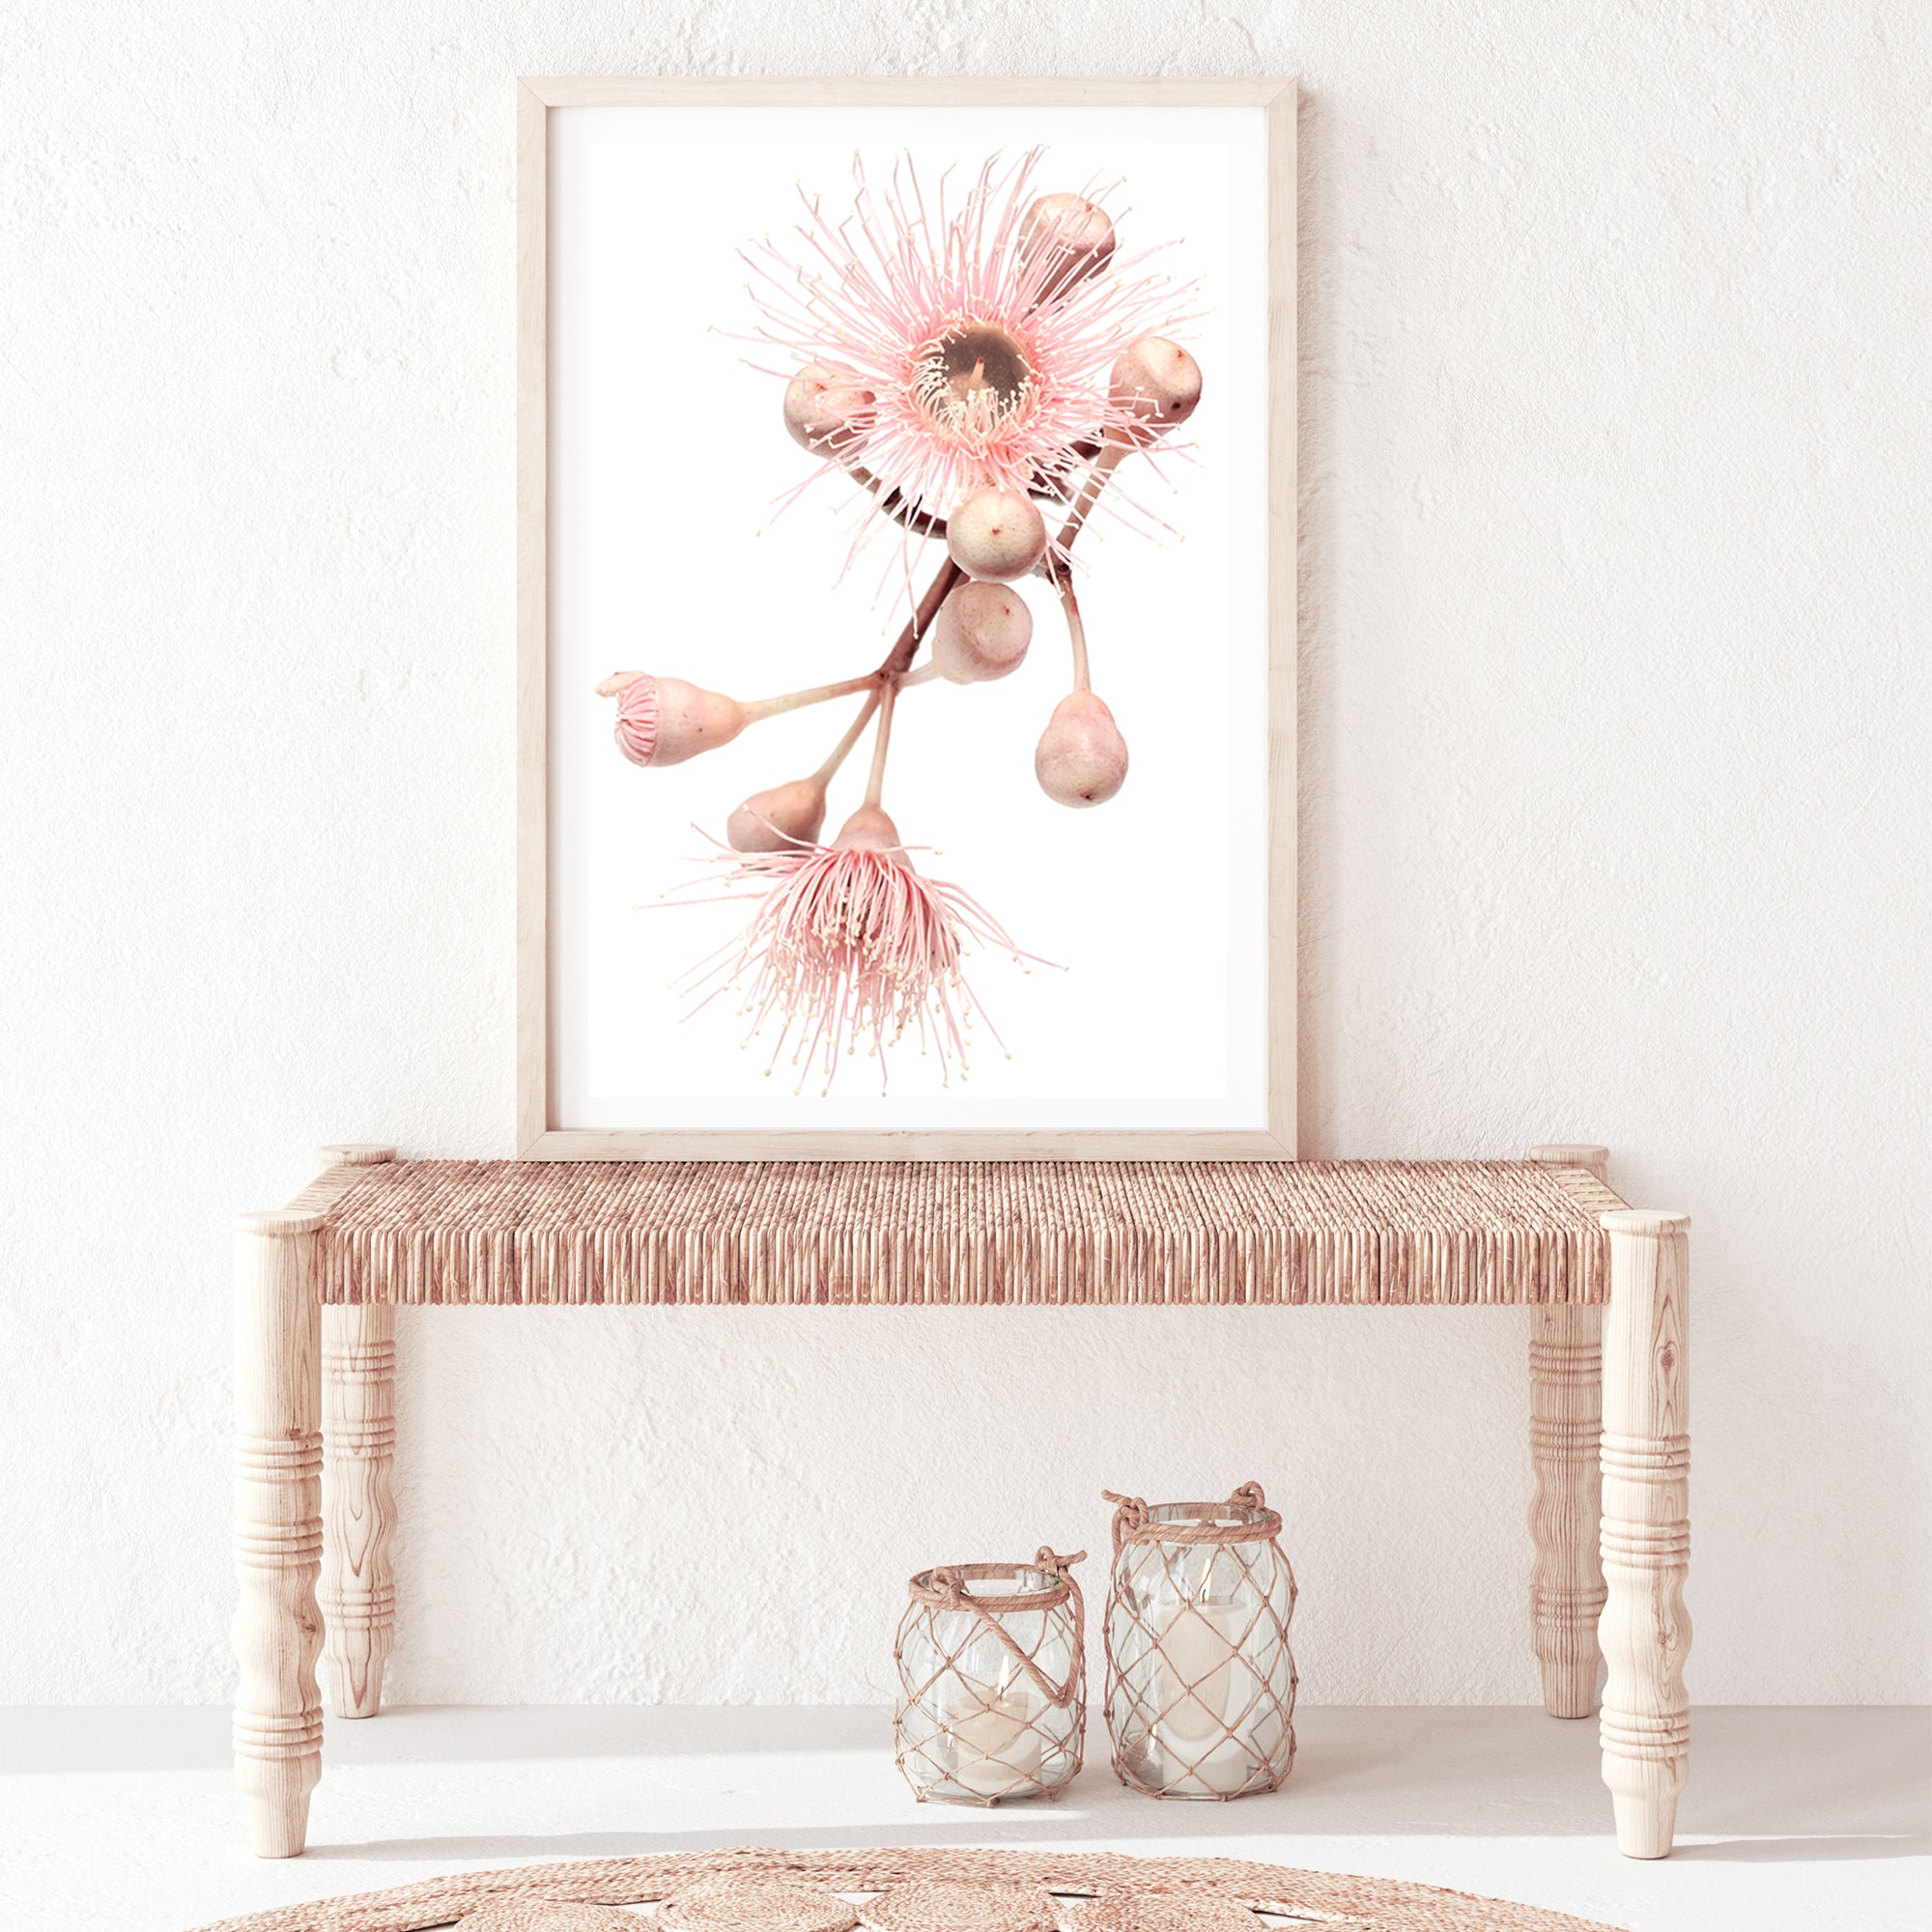 An unframed or framed nature inspired artwork of green leaves and pink eucalyptus wild flowers with a neutral background.